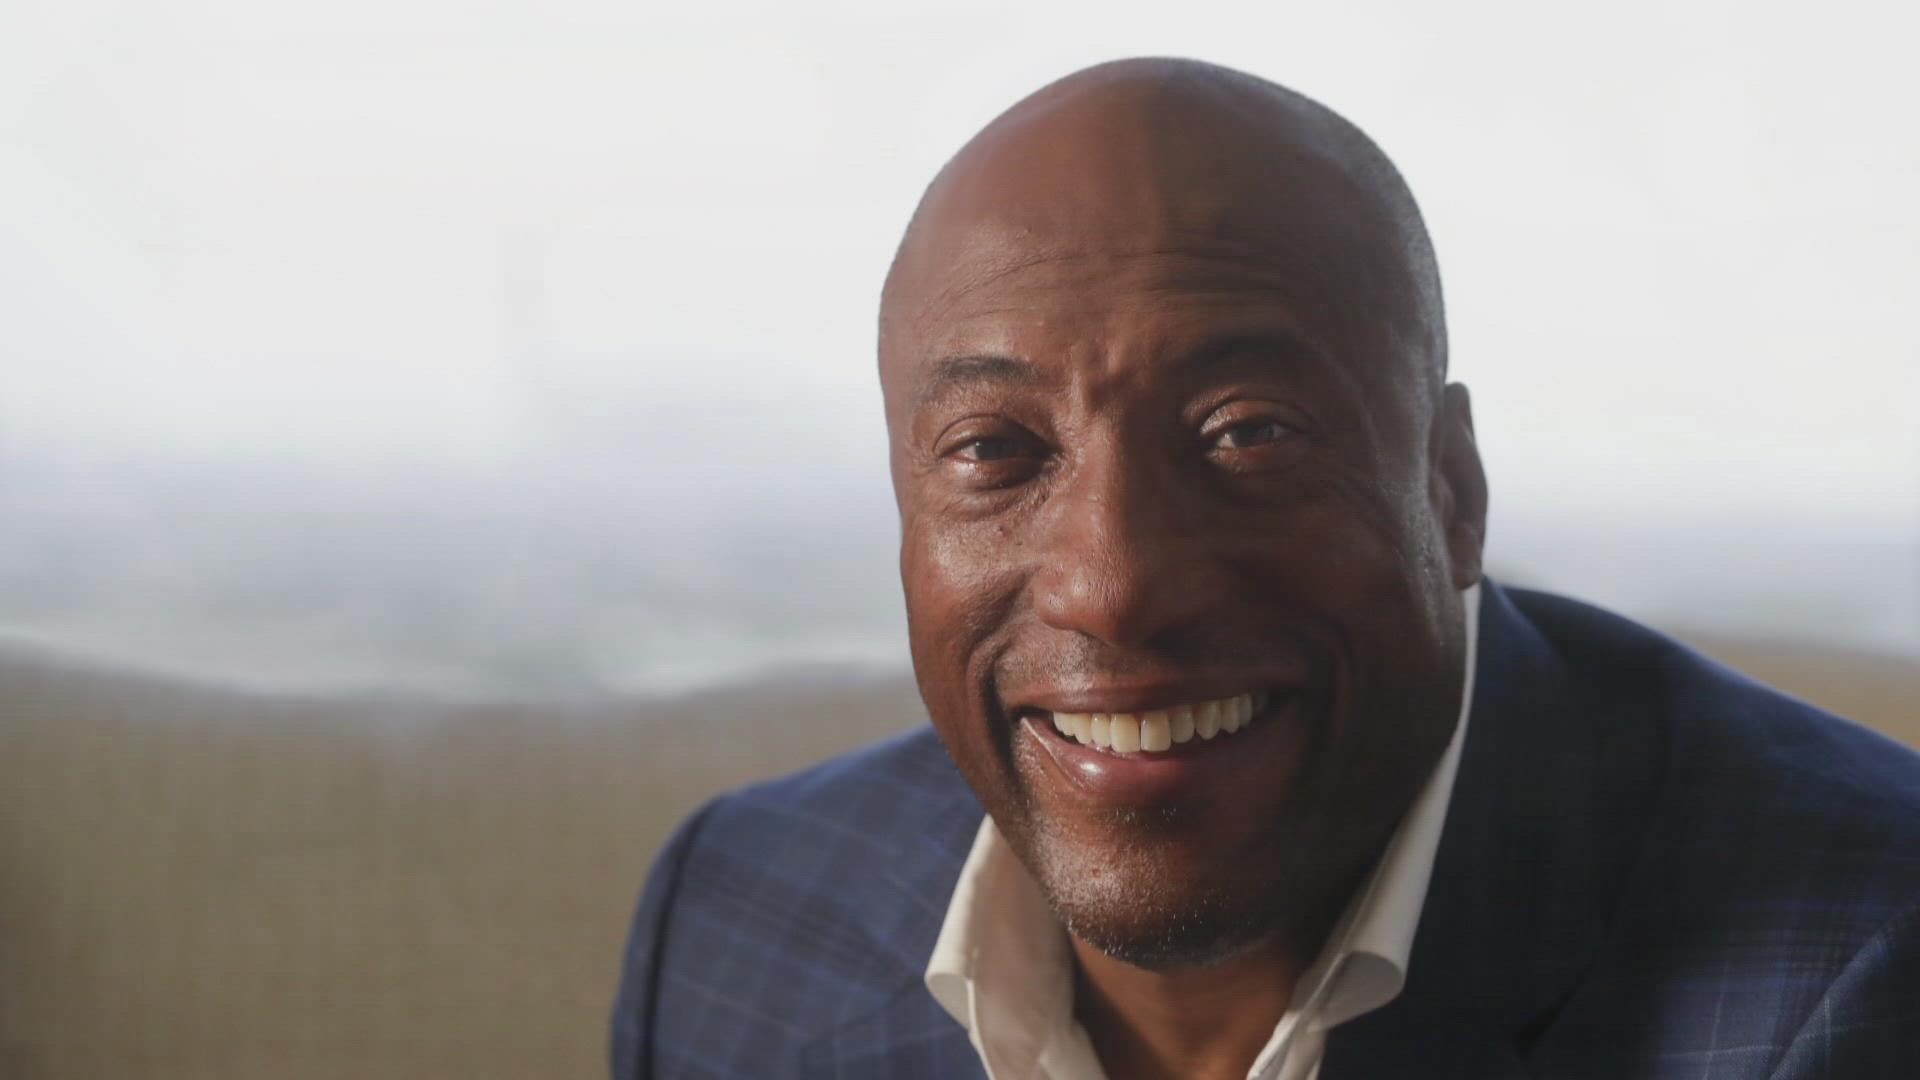 A source tells 9NEWS that one of the remaining ownership candidates to buy the Denver Broncos is Byron Allen, the comedian, actor and media tycoon.